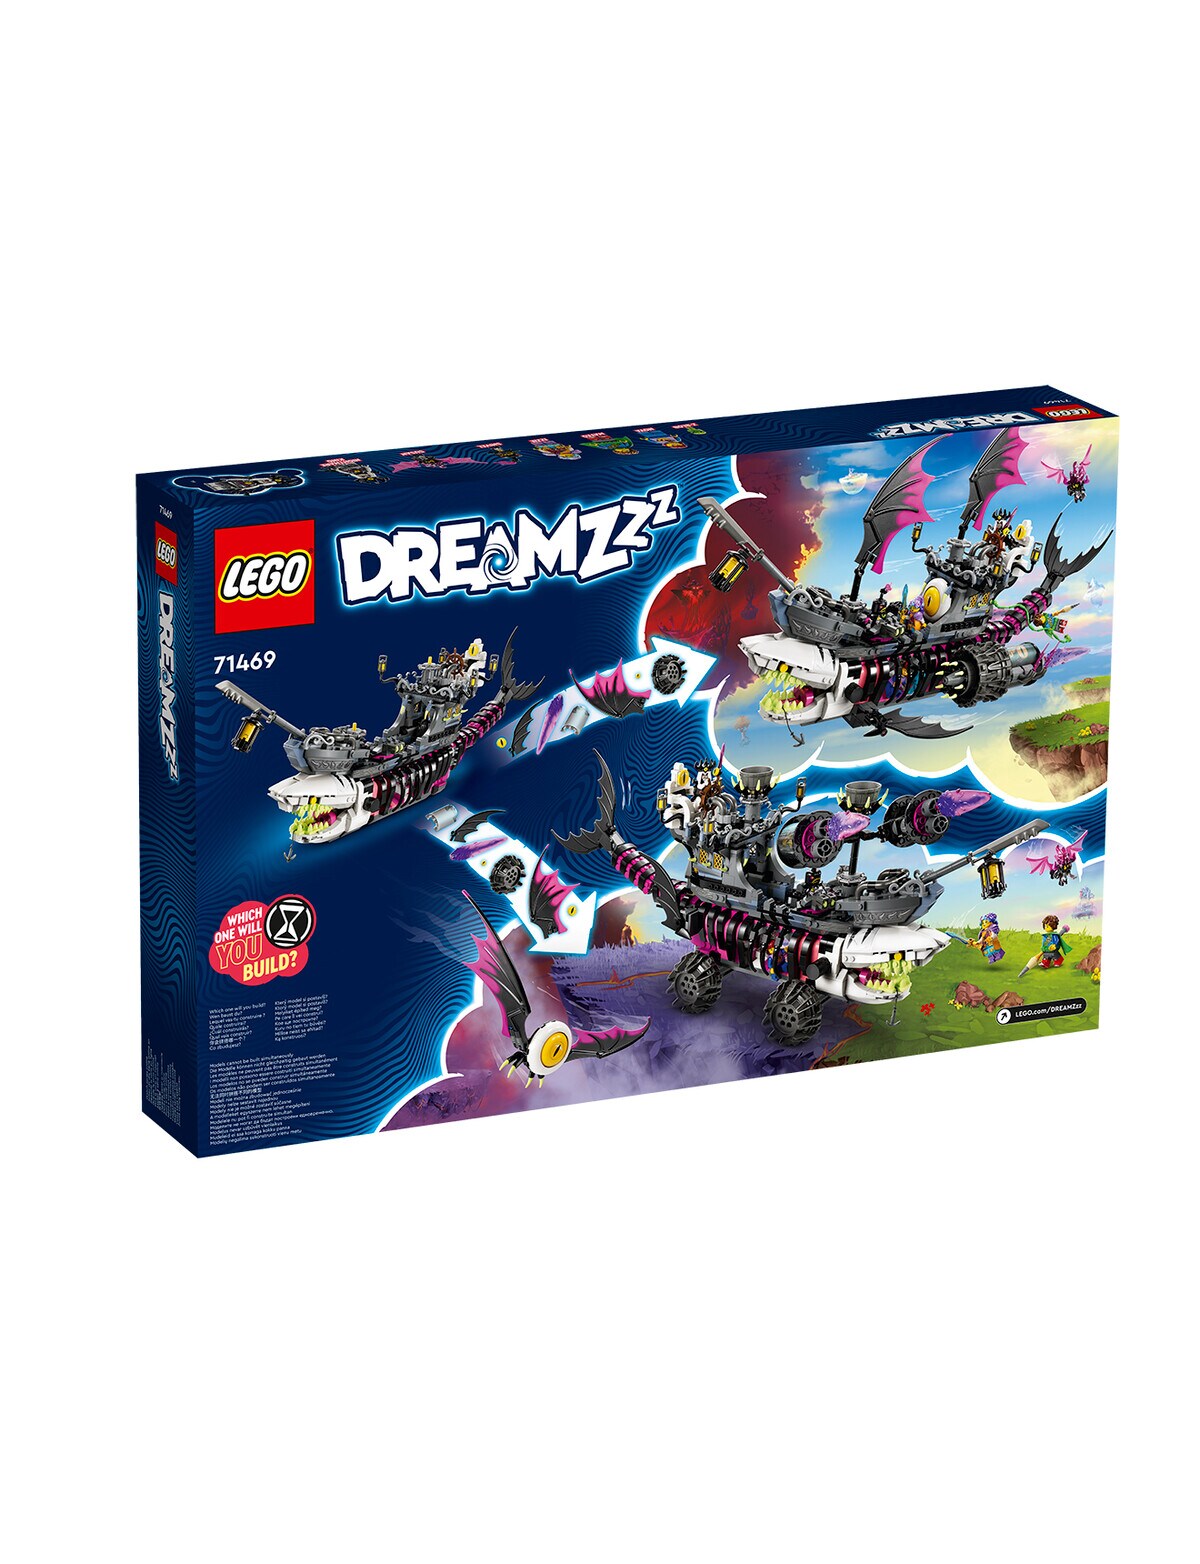 LEGO DREAMZzz Nightmare Shark Ship 71469, Construct The Building Toy Set as  a Flying Pirate Ship or a Monster Truck, Includes 4 Minifigures, Shark